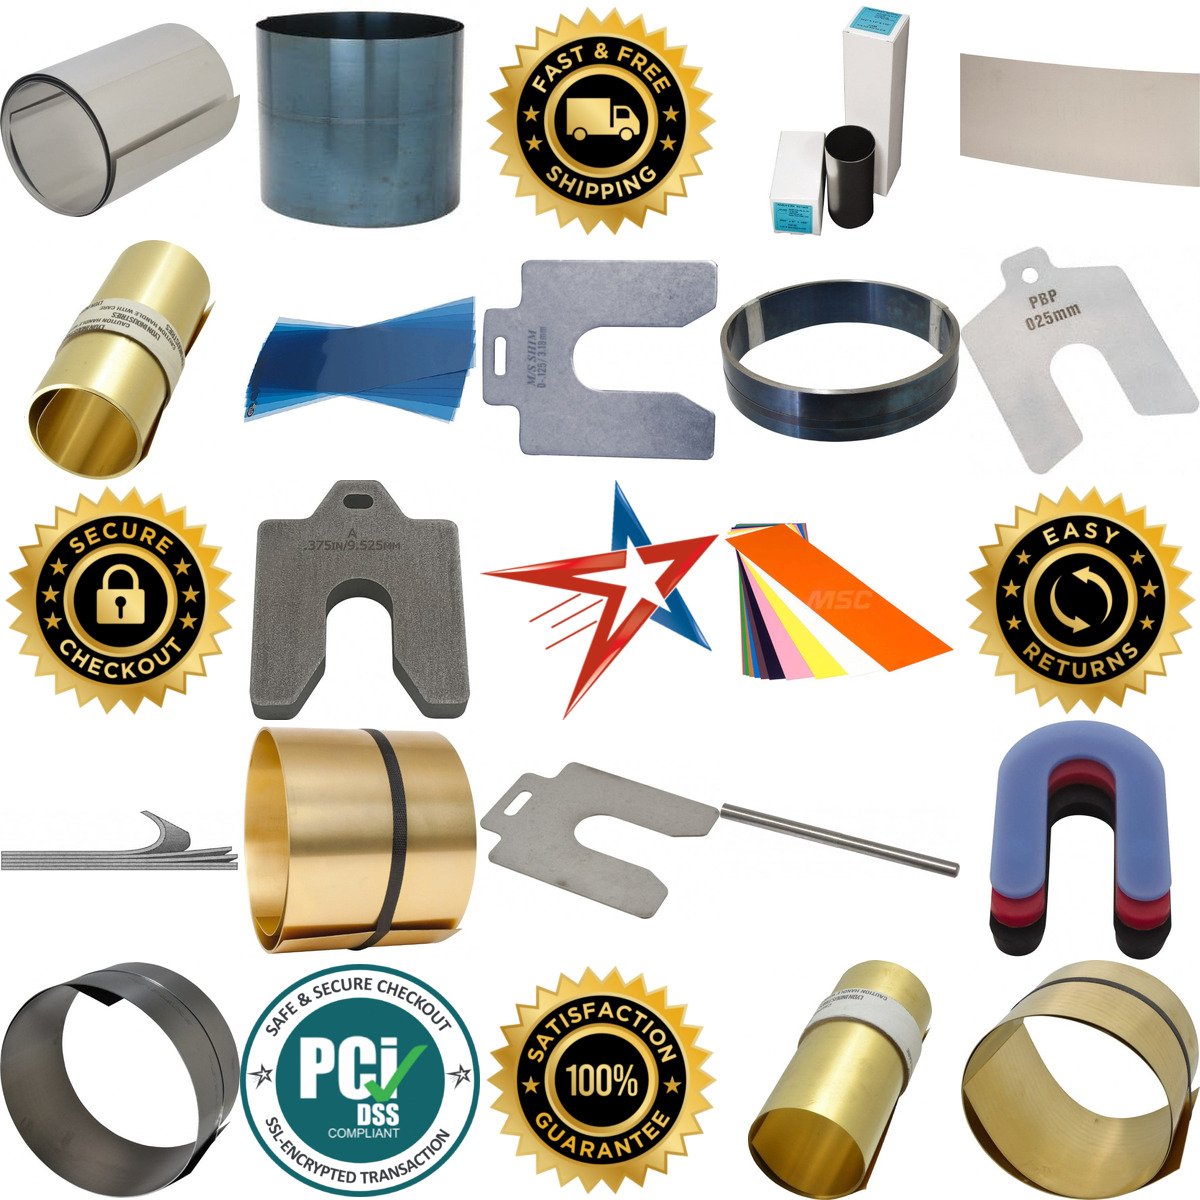 A selection of Shim Stock products on GoVets